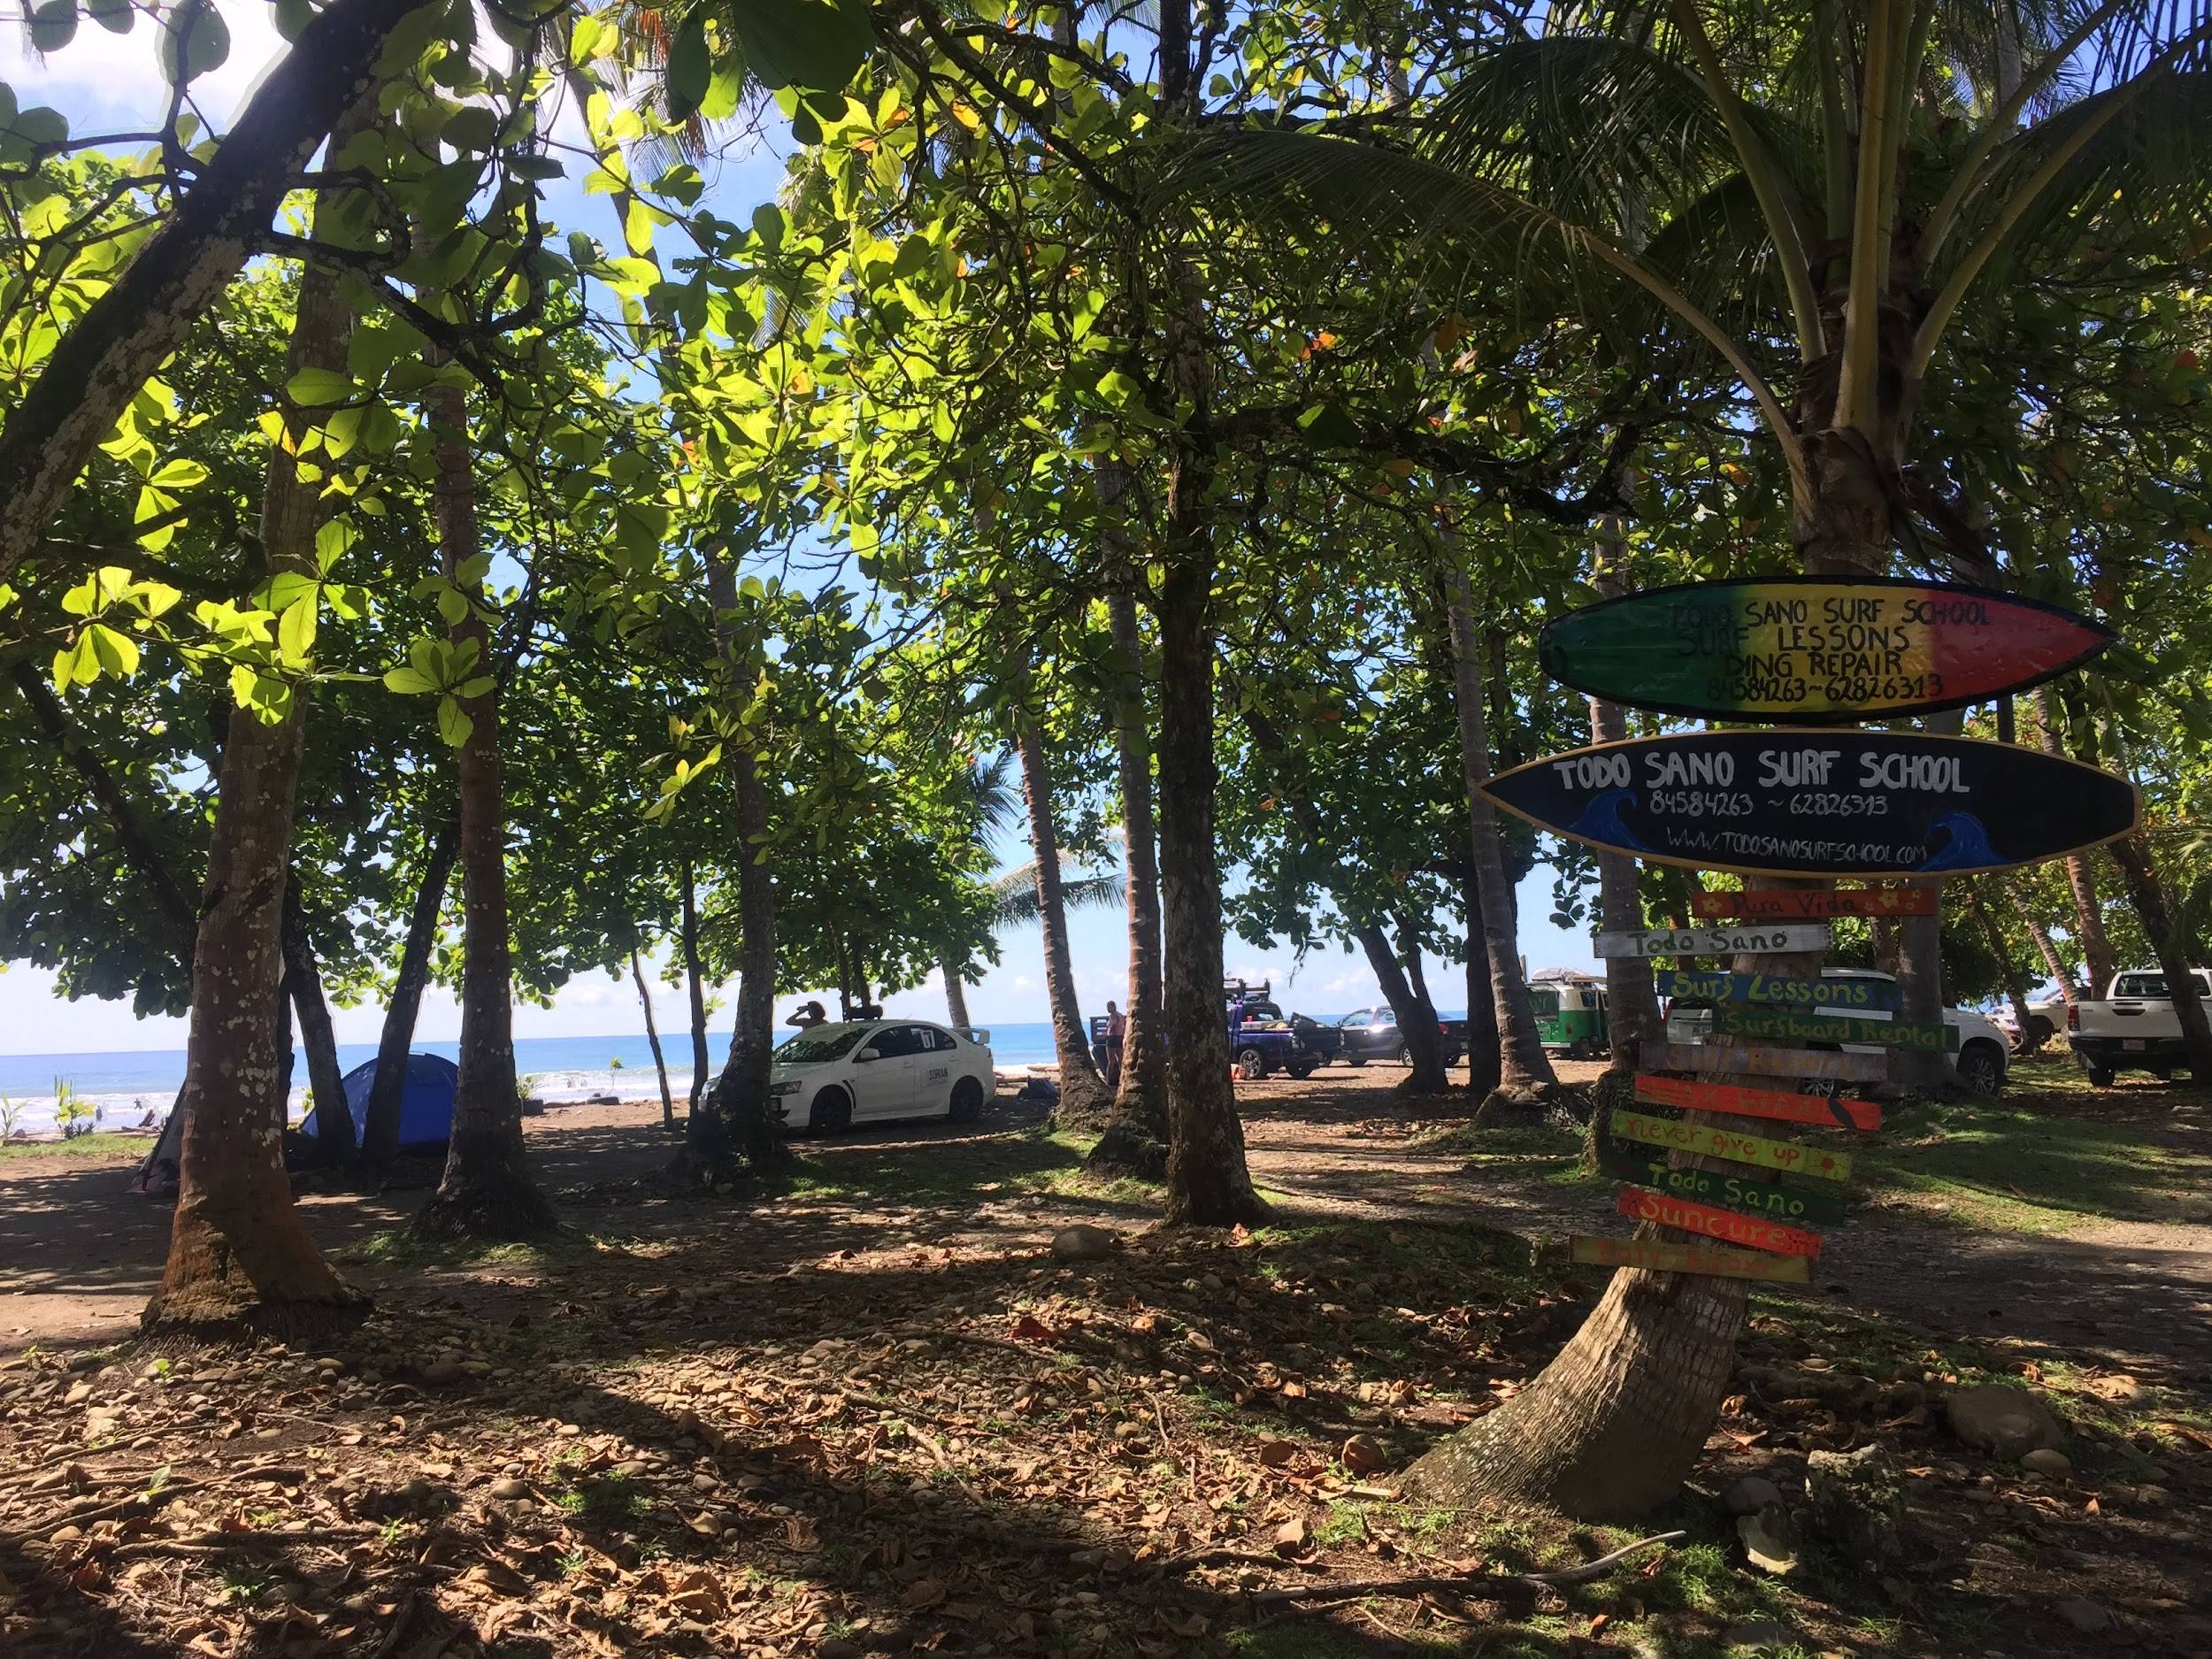 Surf school in forest